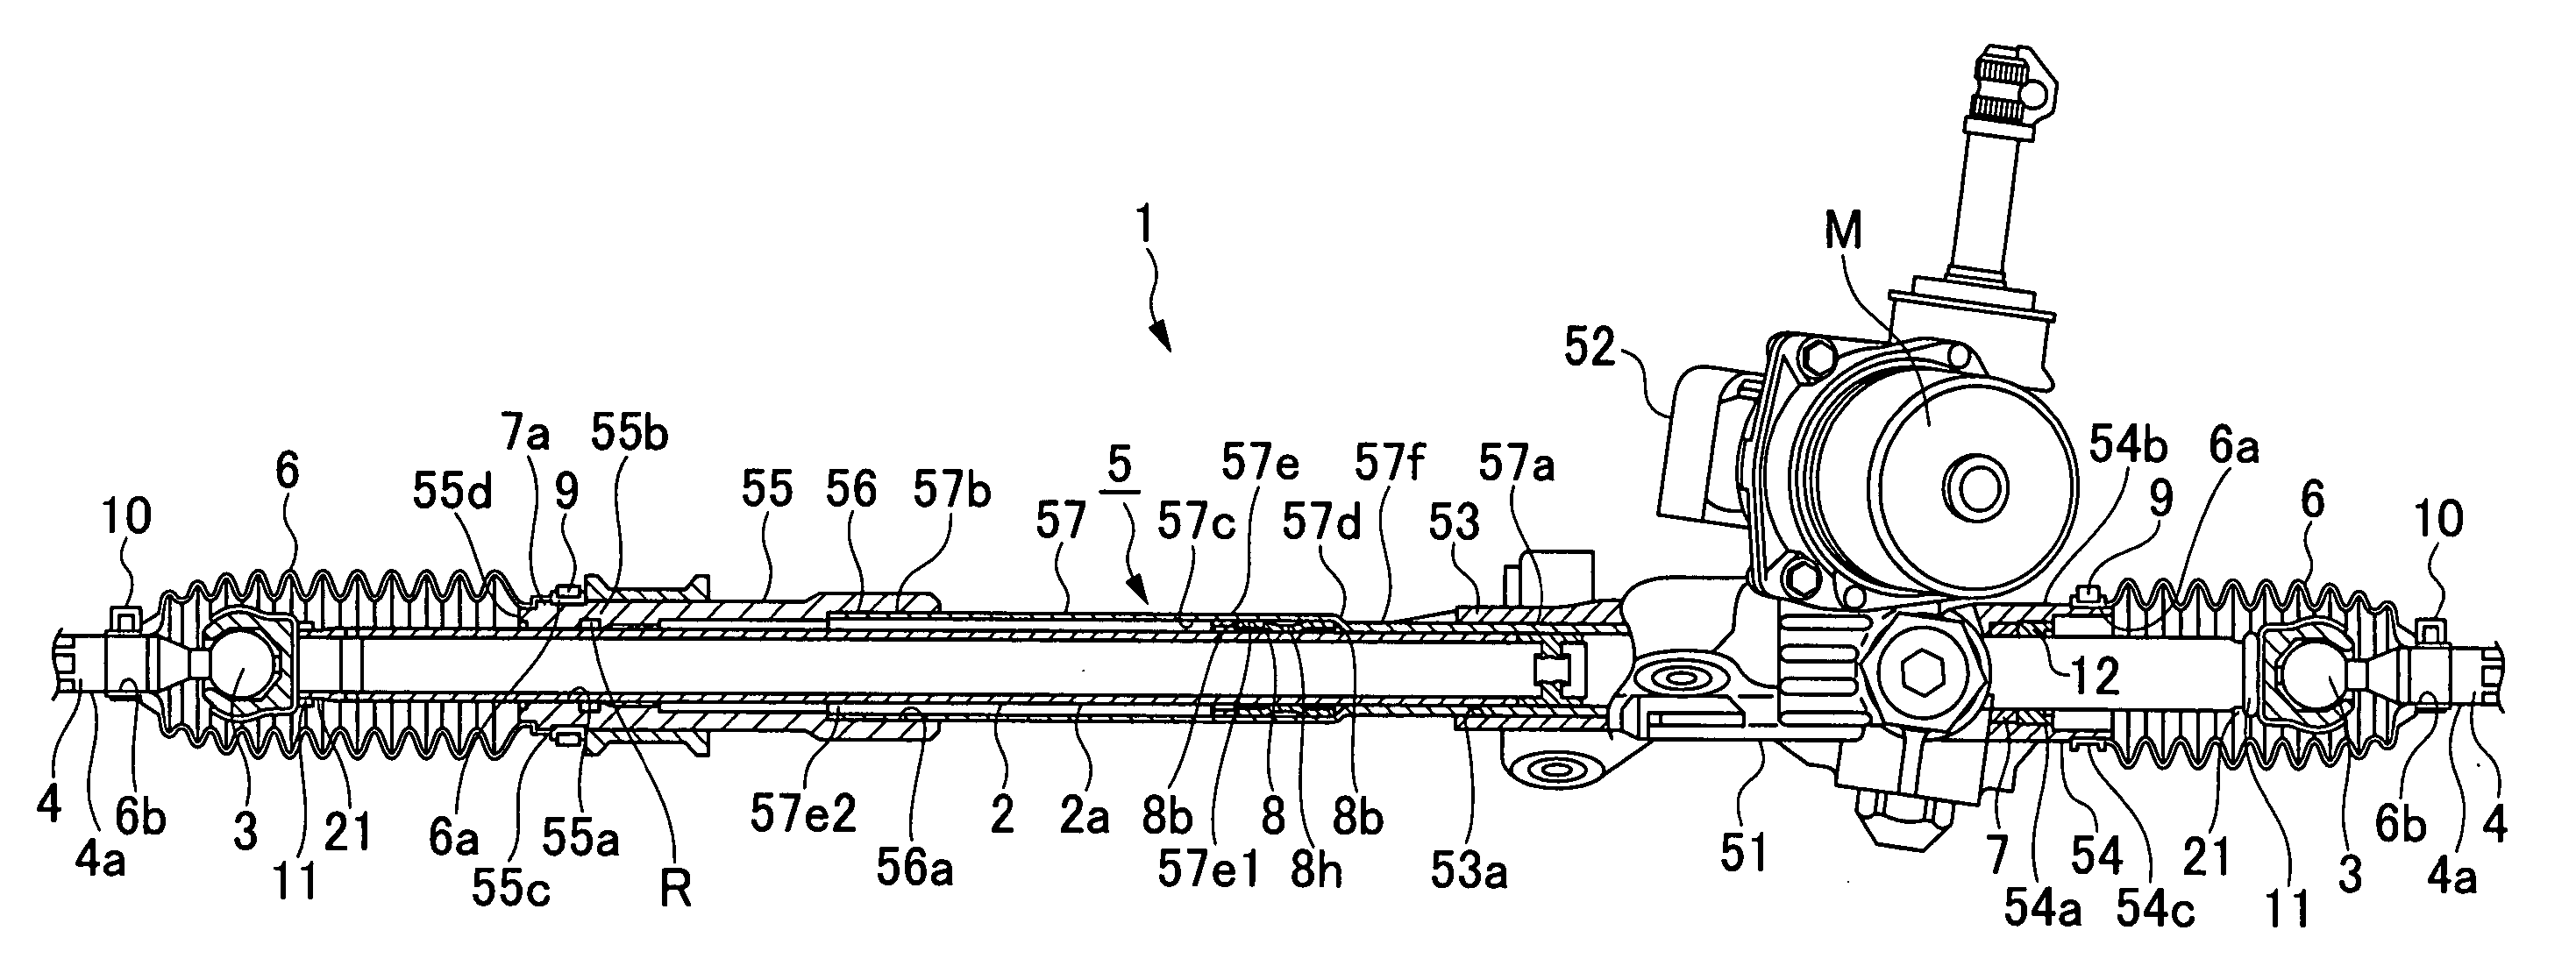 Rack and pinion type power steering apparatus